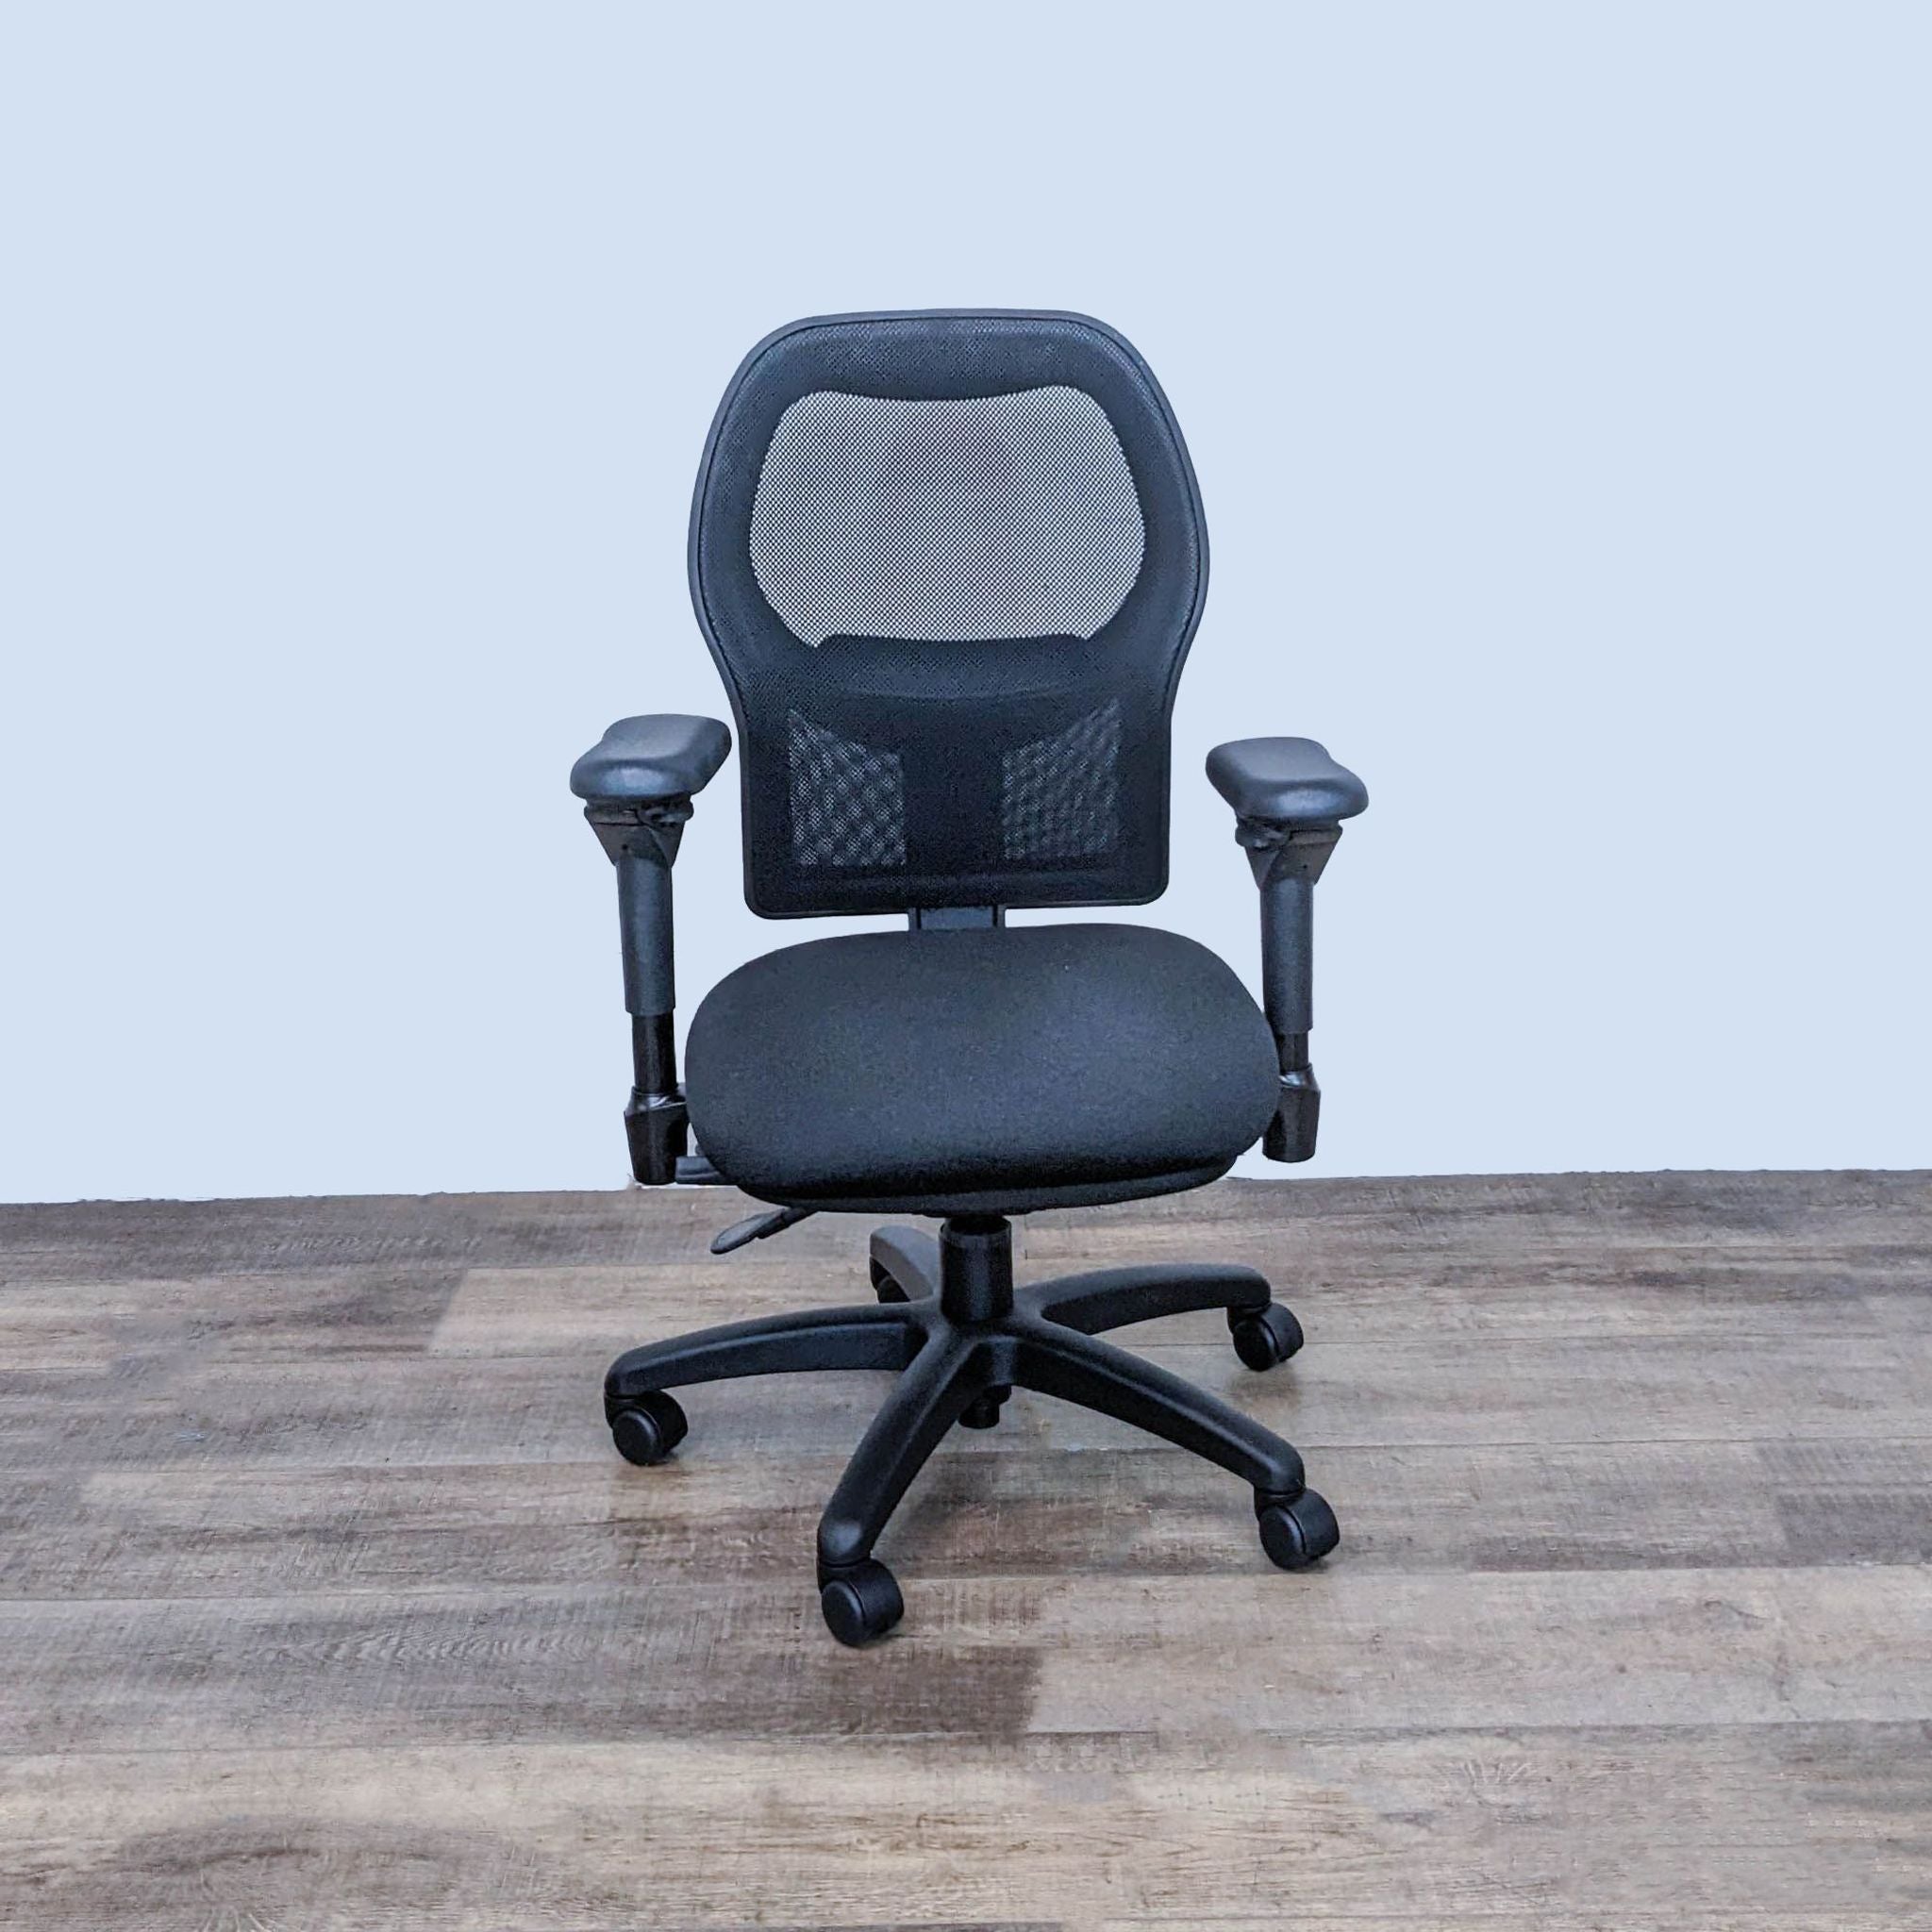 Bodybilt ergonomic office chair with adjustable back and armrests, lumbar support, on wooden floor.